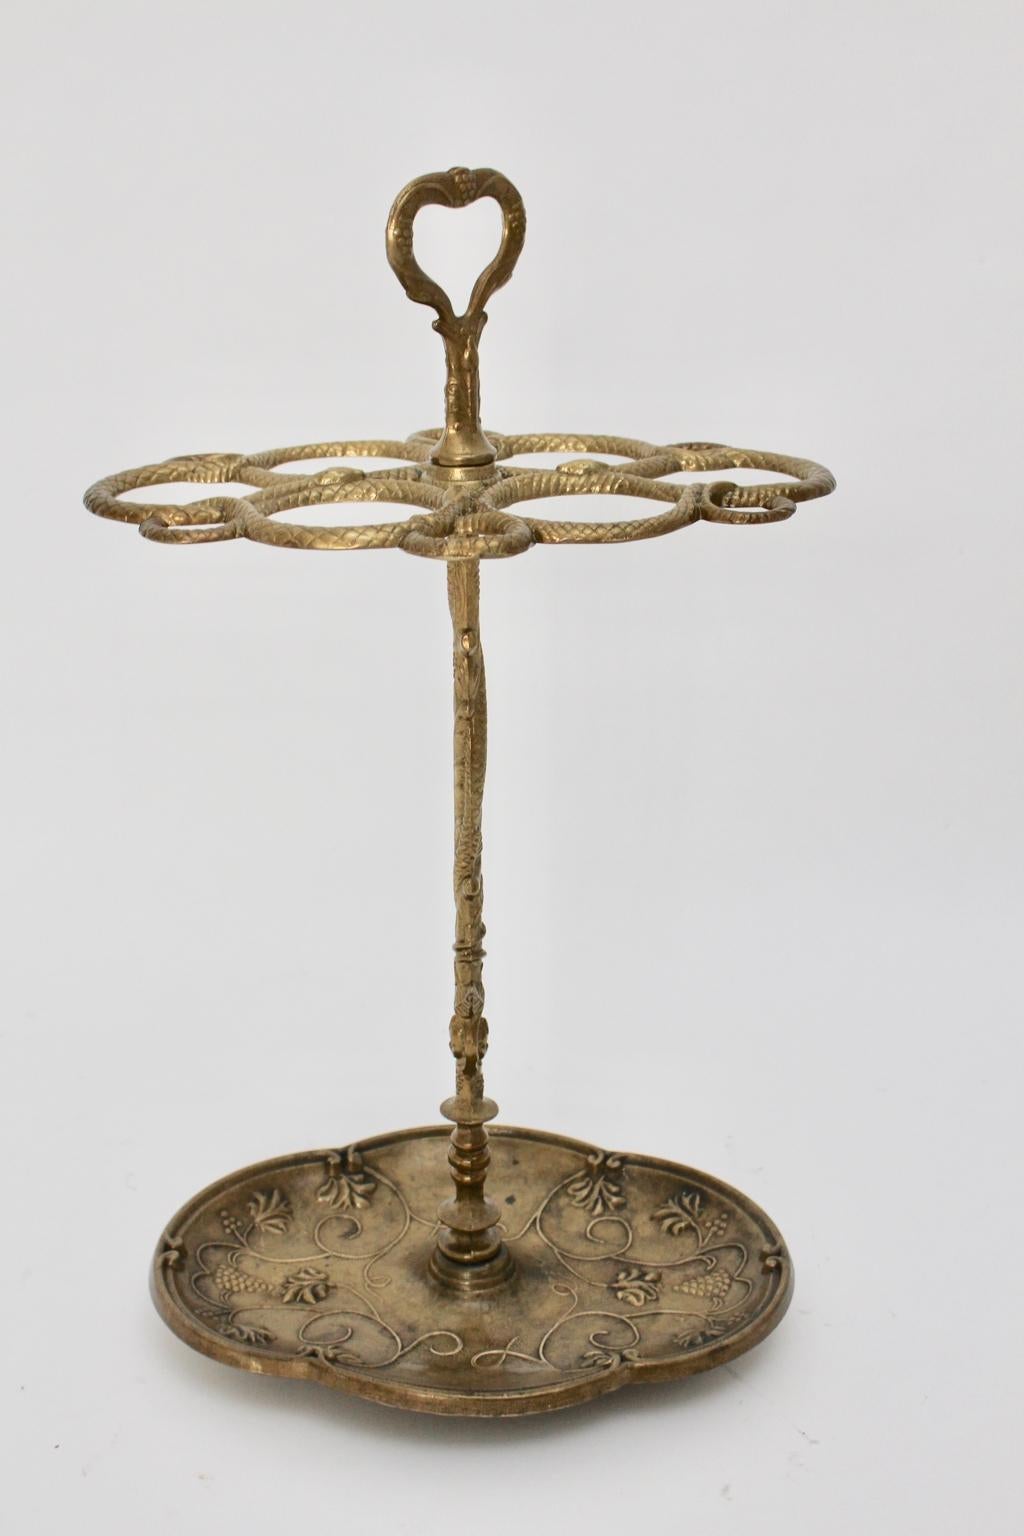 Hoolywood Regency Style vintage brass umbrella stand richly decorated with grapes and snakes. The umbrella stand shows good condition with signs of age and use like great brass patina.
Throughout the heavy material brass the umbrella stand features